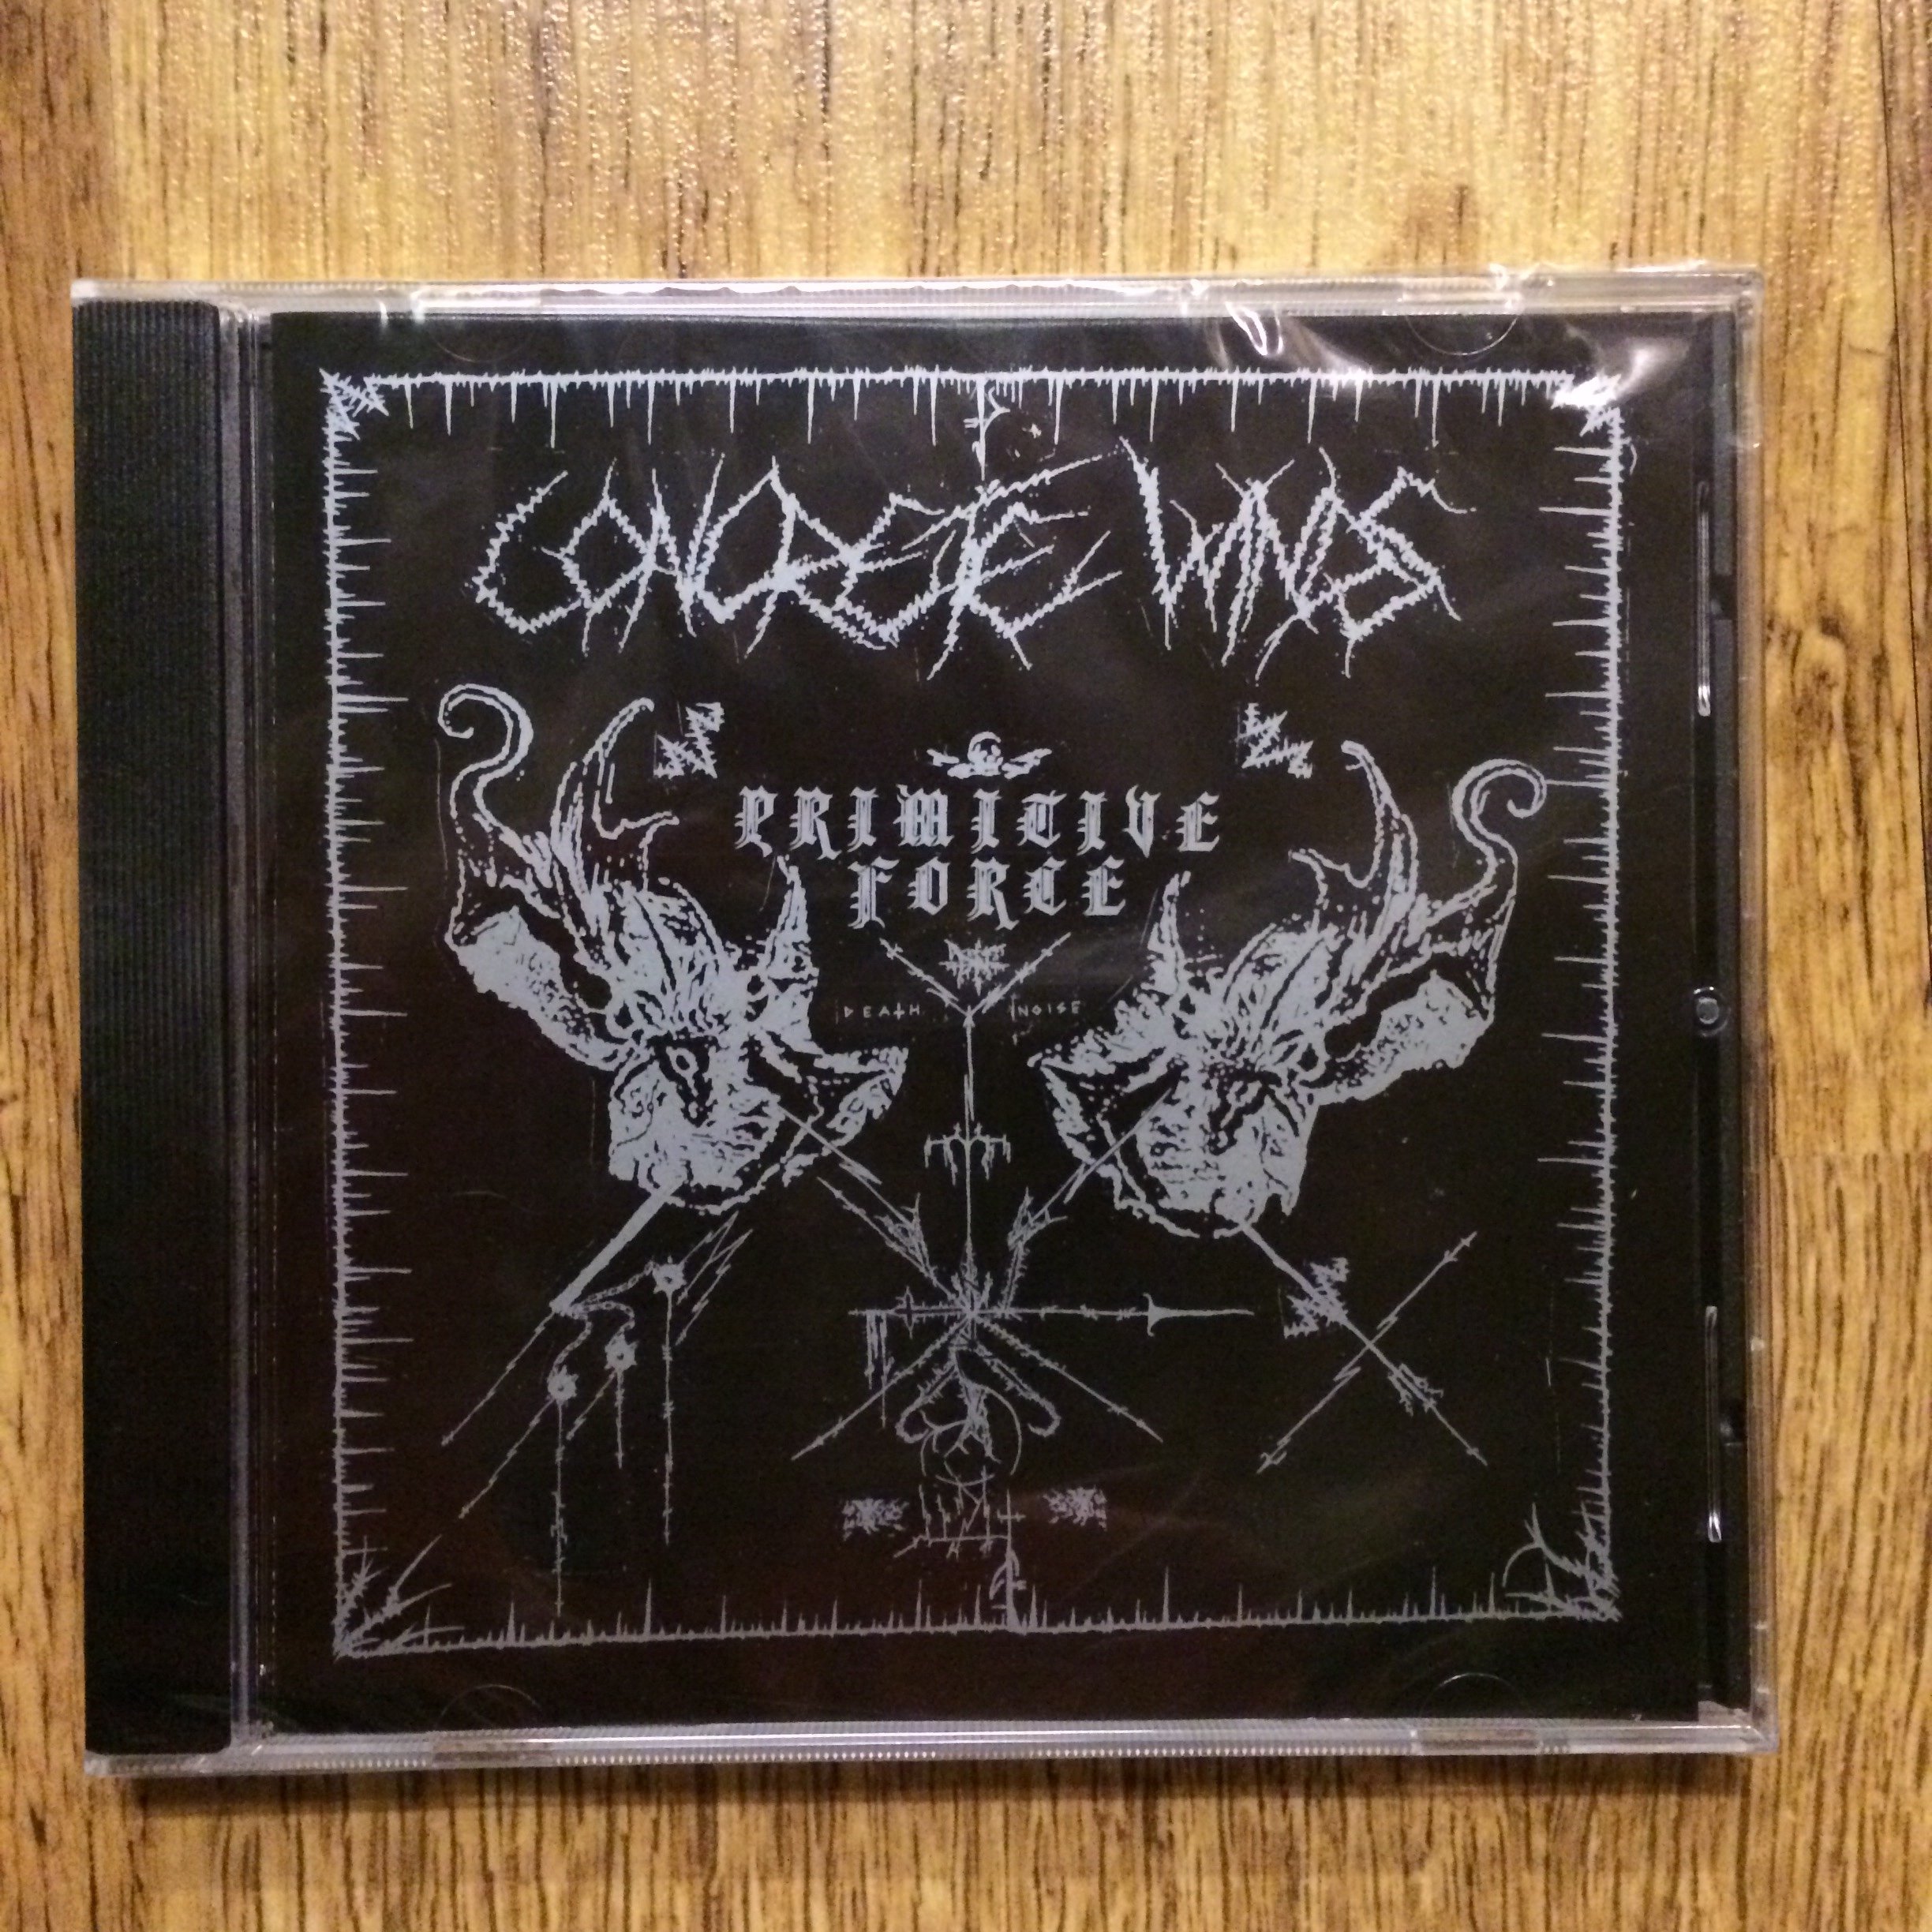 Photo of the Concrete Winds - "Primitive Force" CD